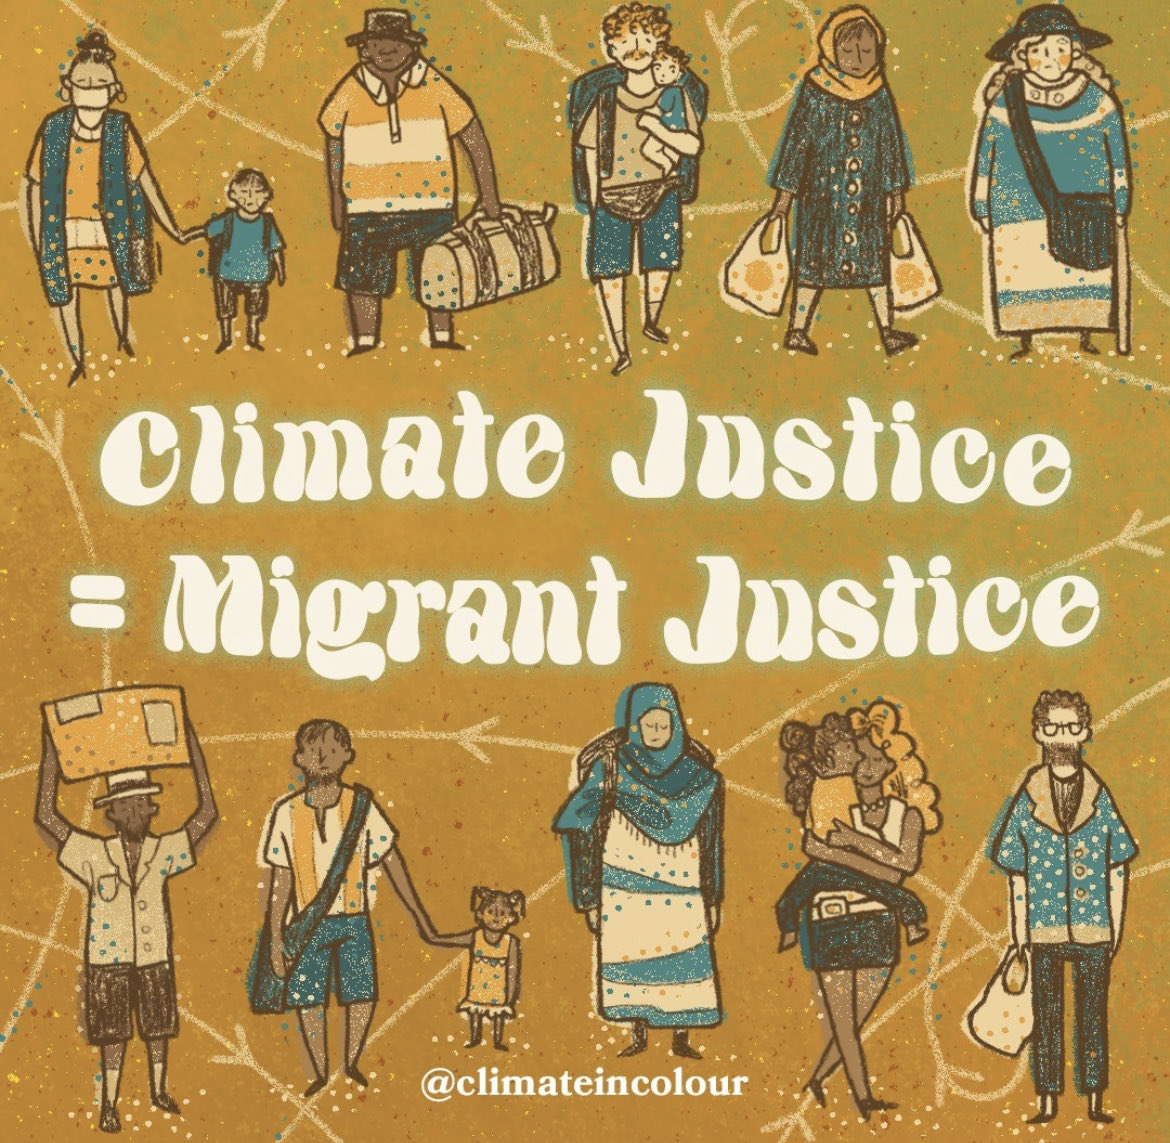 #ClimateJustice #MigrantJustice are intimately related. And common antagonists are capitalism and ethnonationalism.